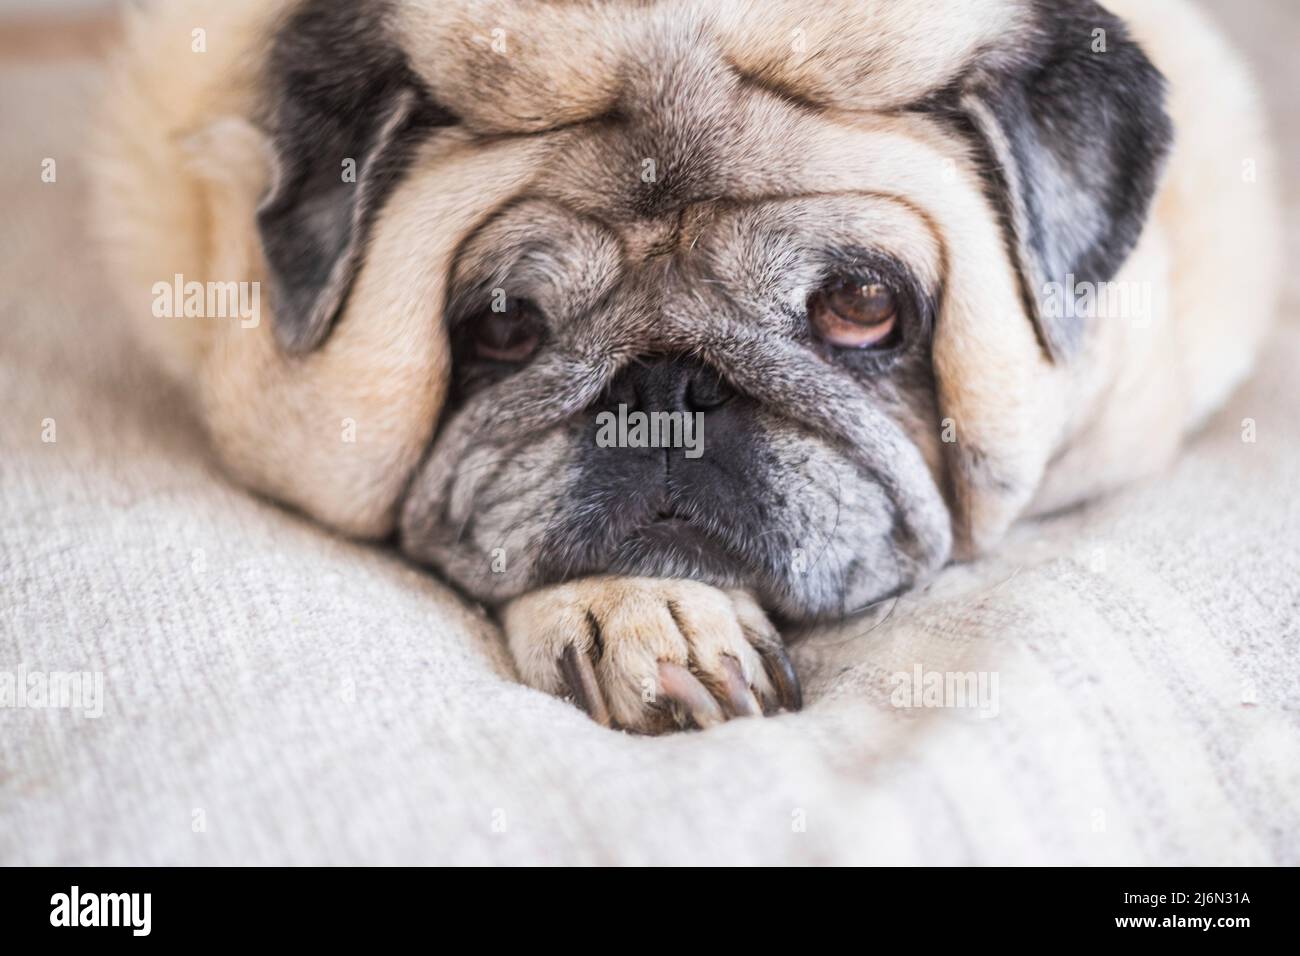 Portrait of lazy old pug dog laying on a white blanket and looking on camera. Stock Photo